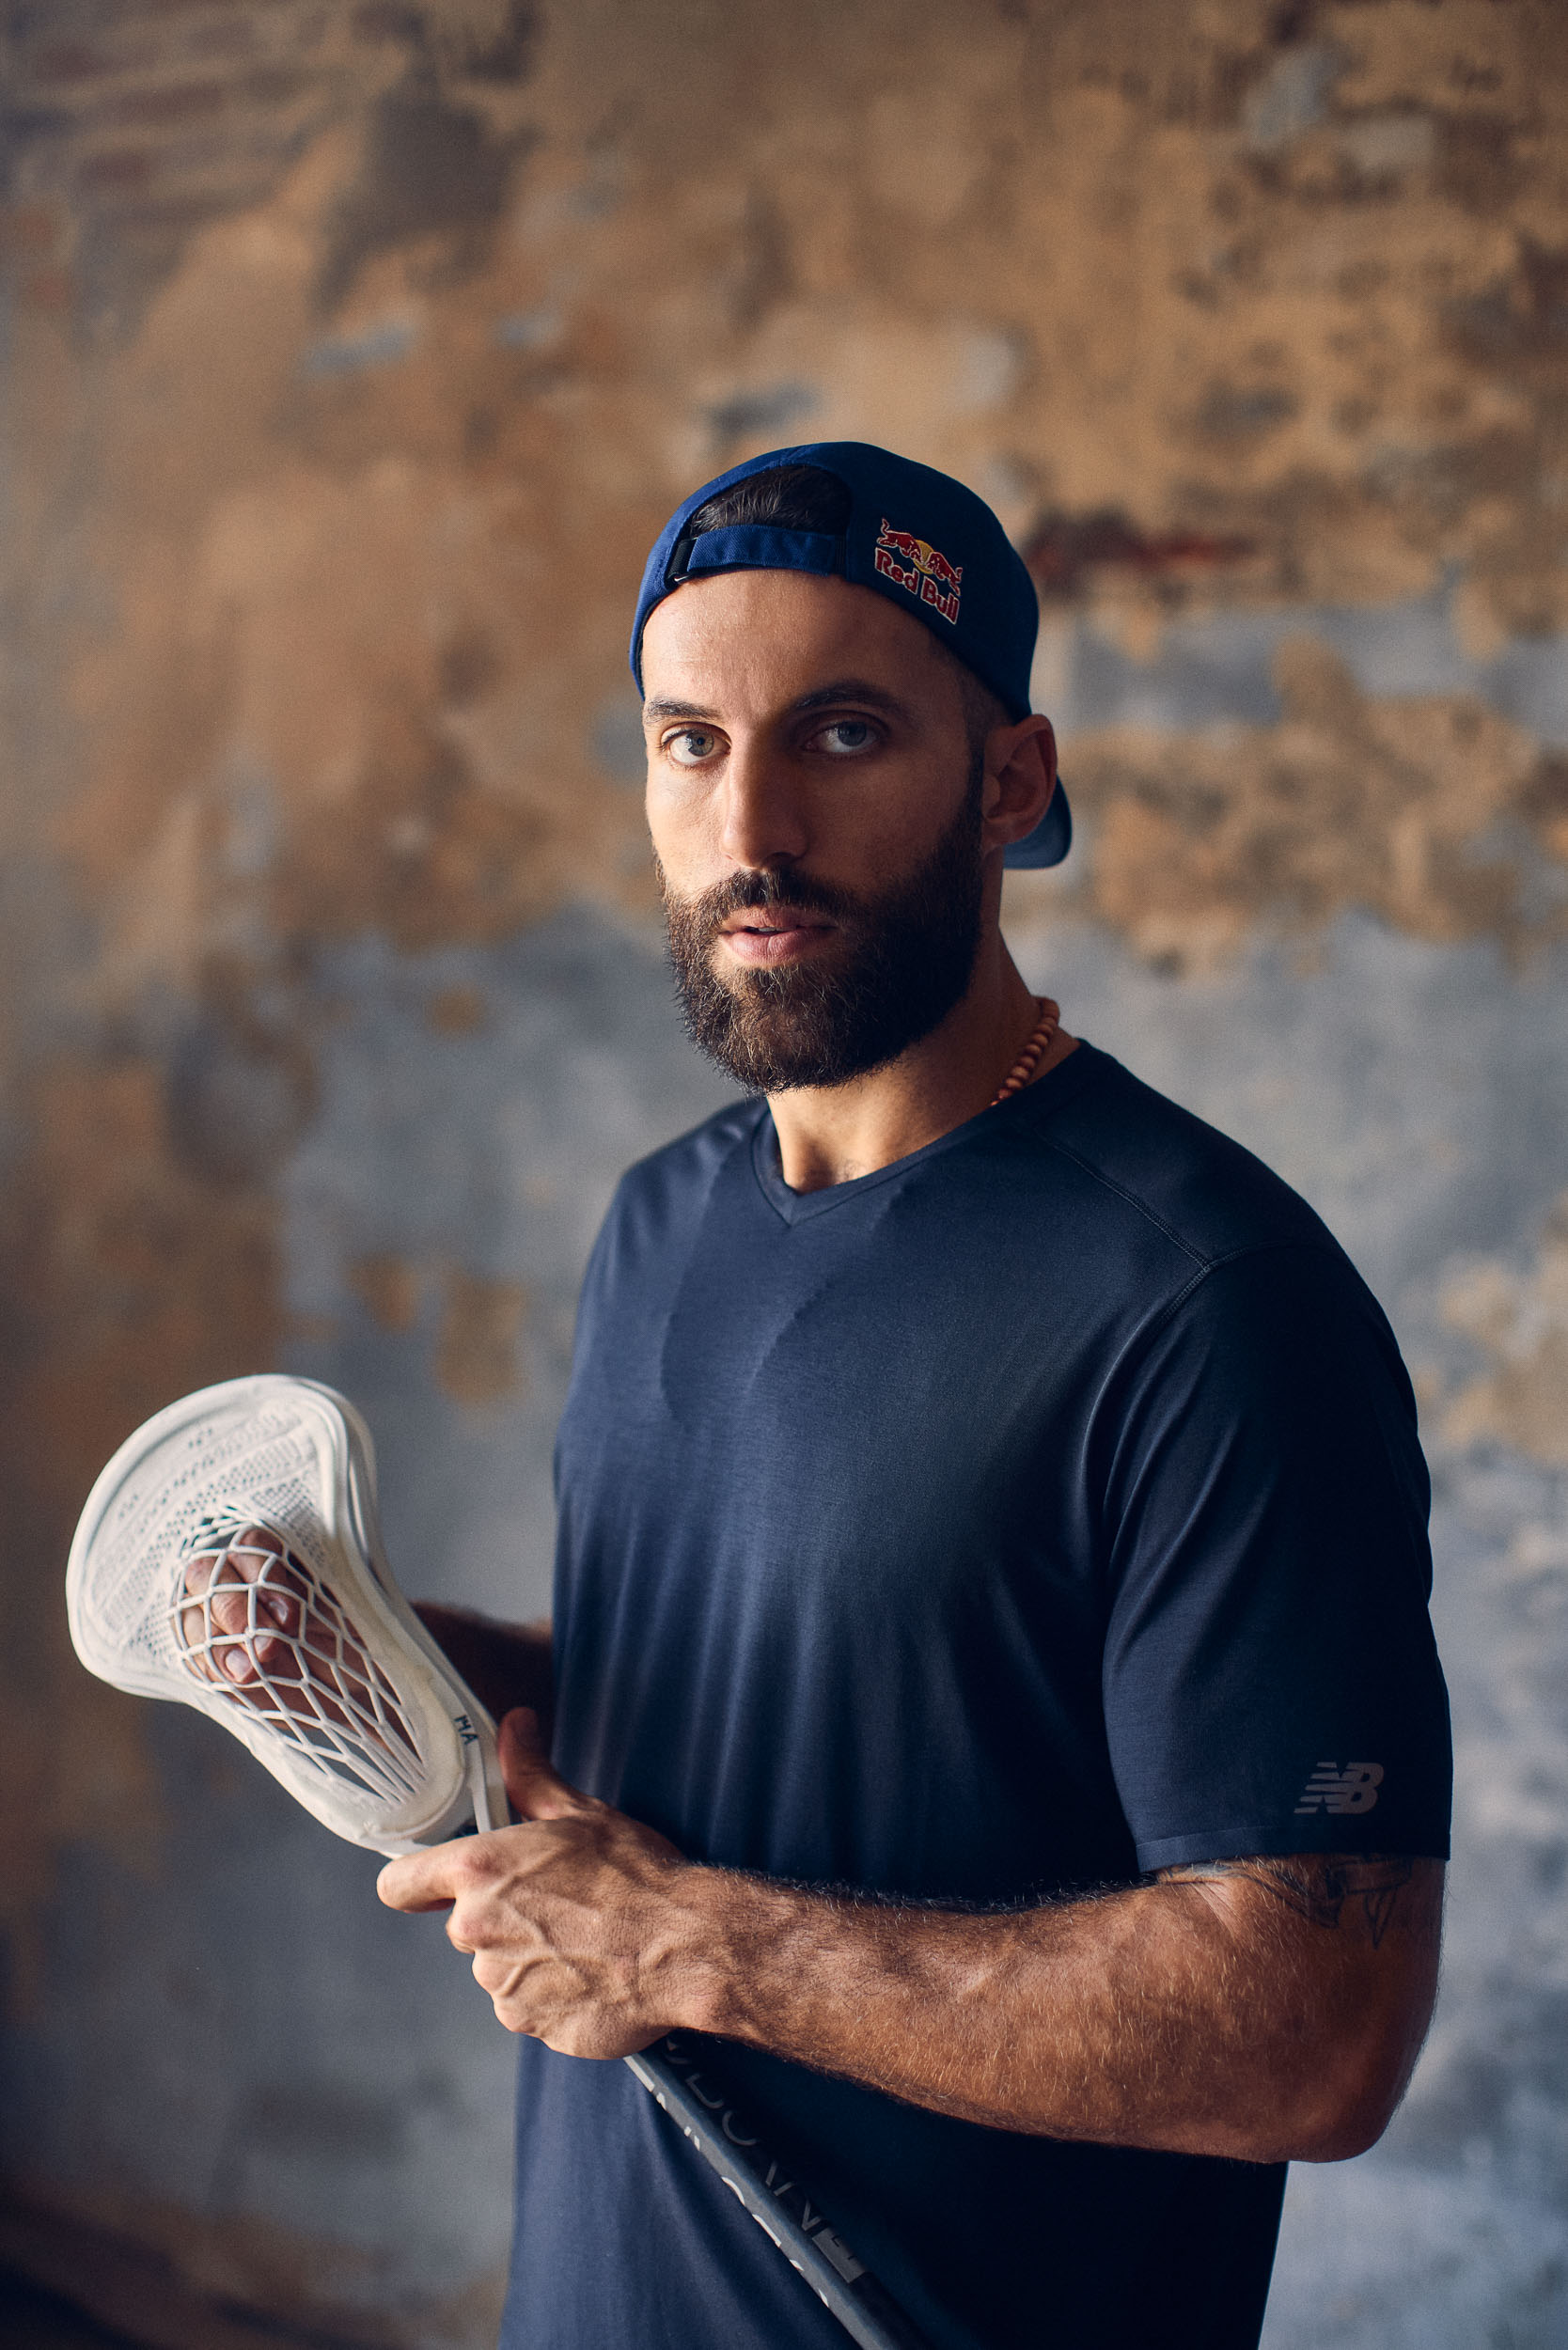 RED BULL ACTION SPORTS PHOTOGRAPHY OF WORLD CHAMPION LACROSSE ATHLETE PAUL RABIL FOUNDER OF PREMIERE LACROSSE LEAGUE BY COMMERCIAL SPORTS ADVERTISING PHOTOGRAPHER SHAWN HUBBARD